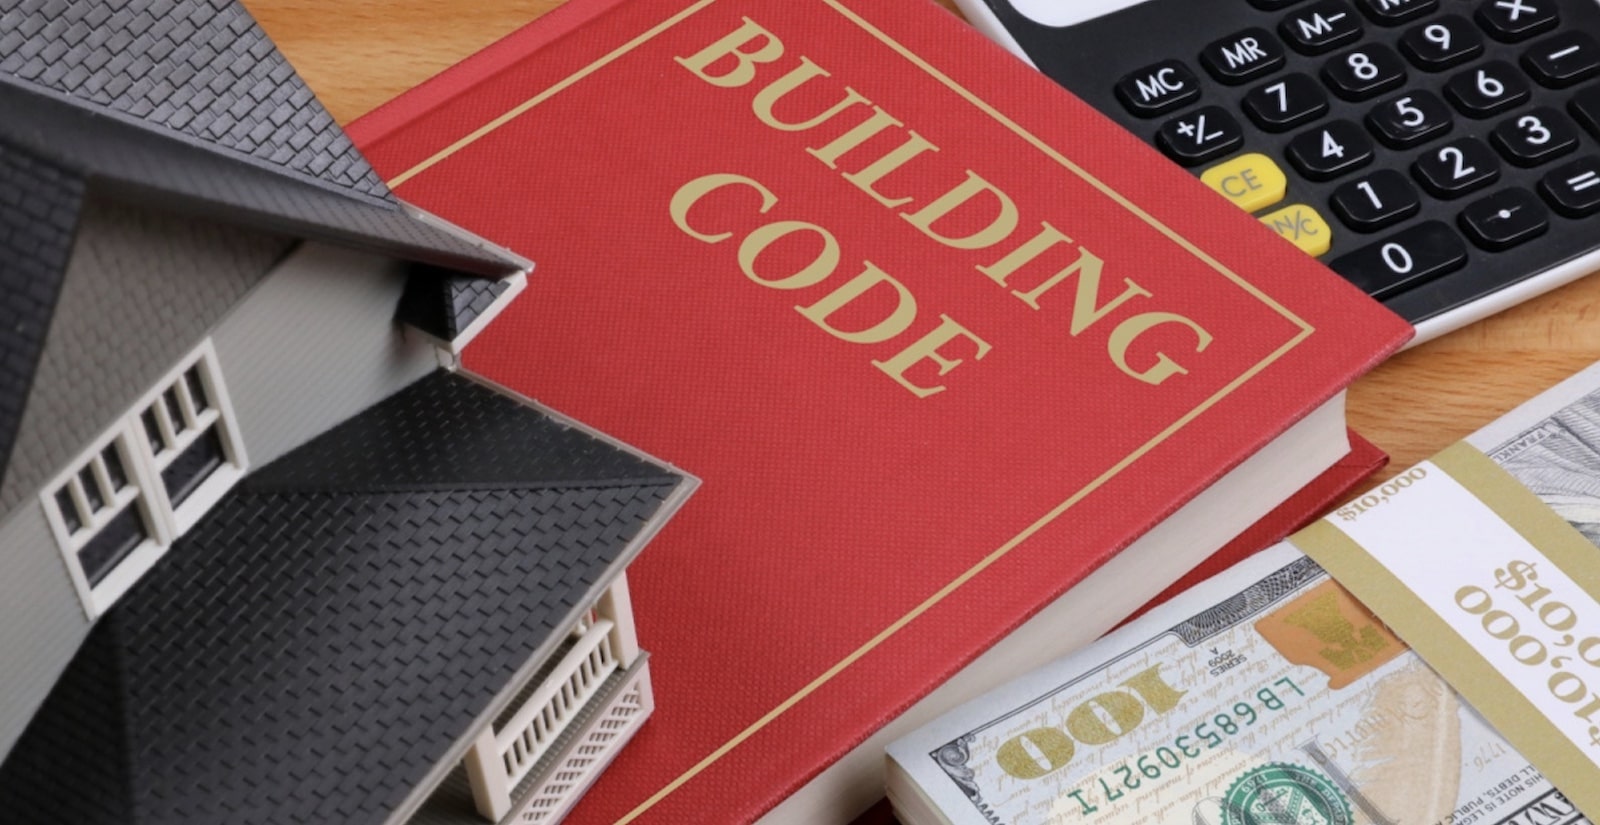 Home building codes